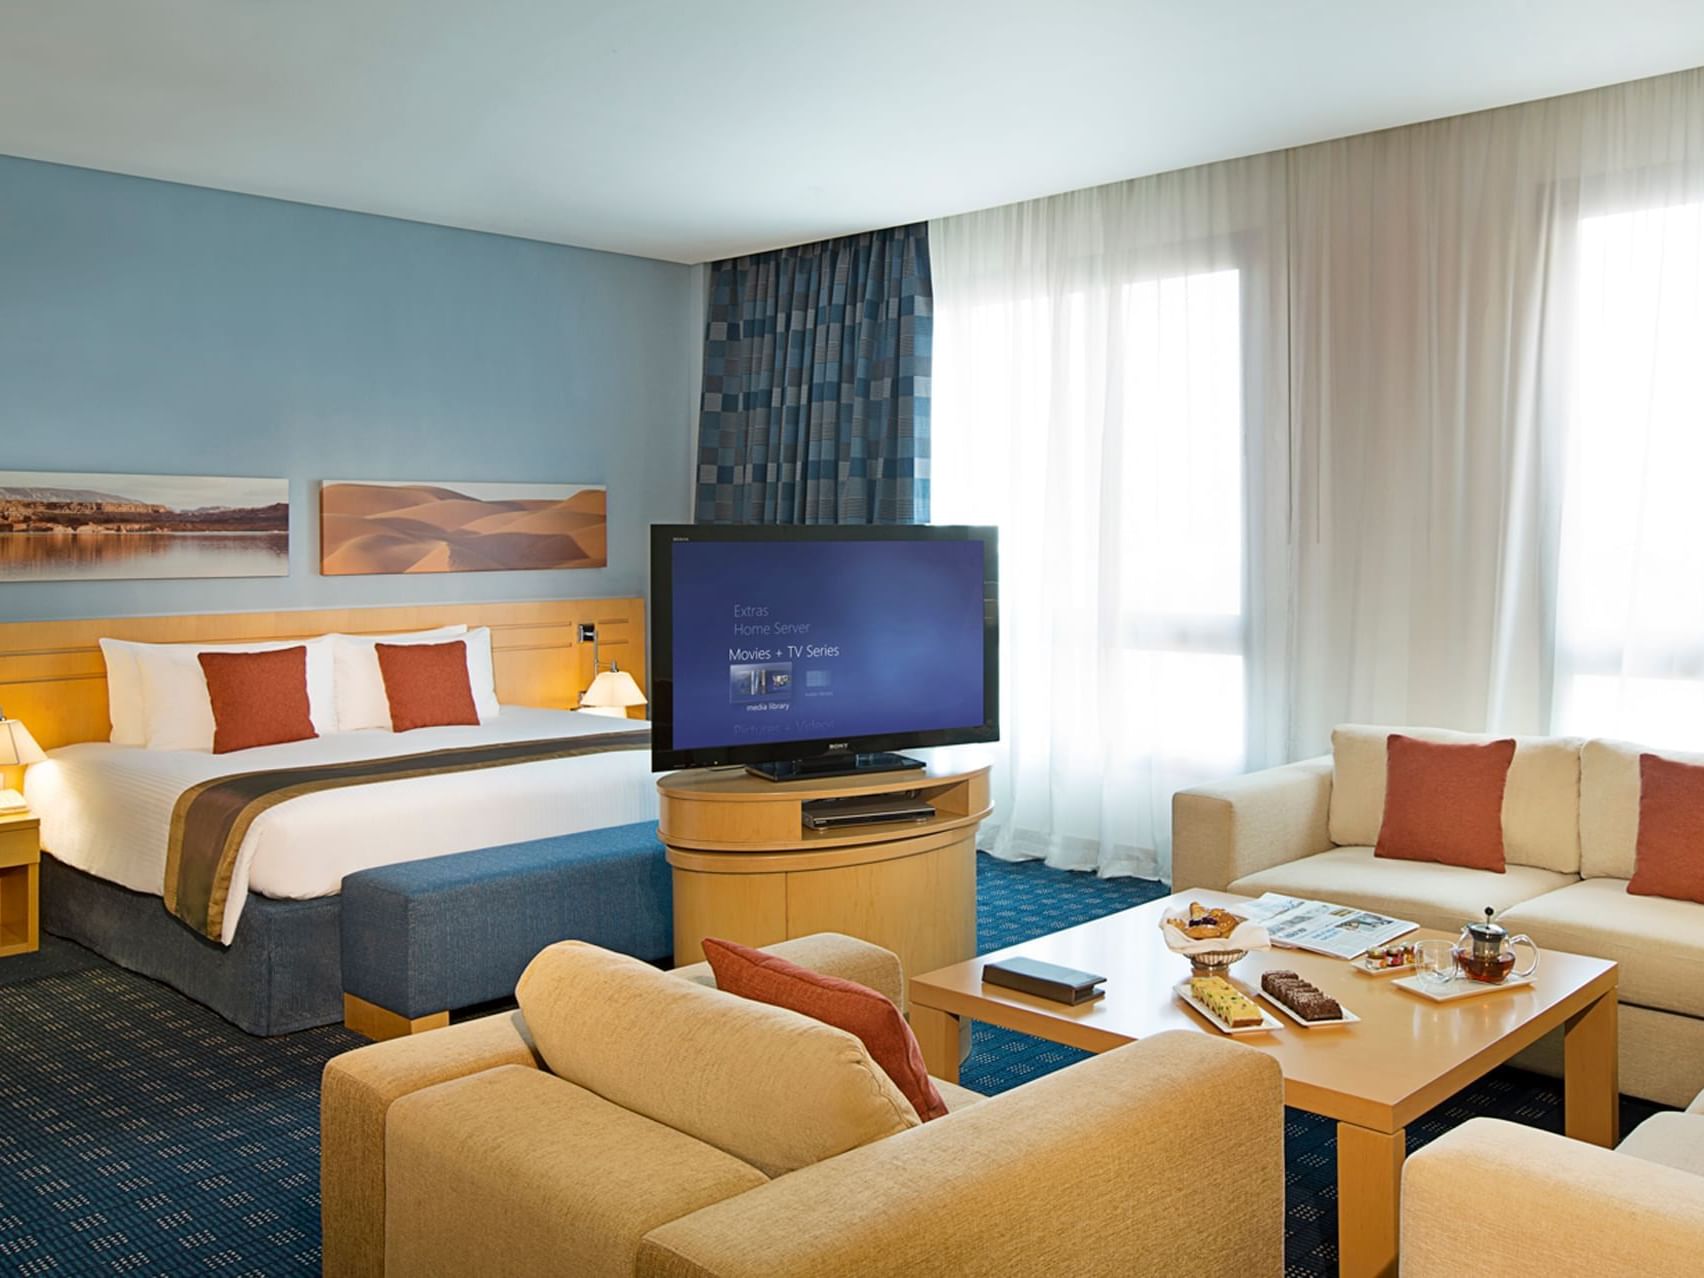 Bed & TV lounge area in Junior Suite at City Seasons Hotels